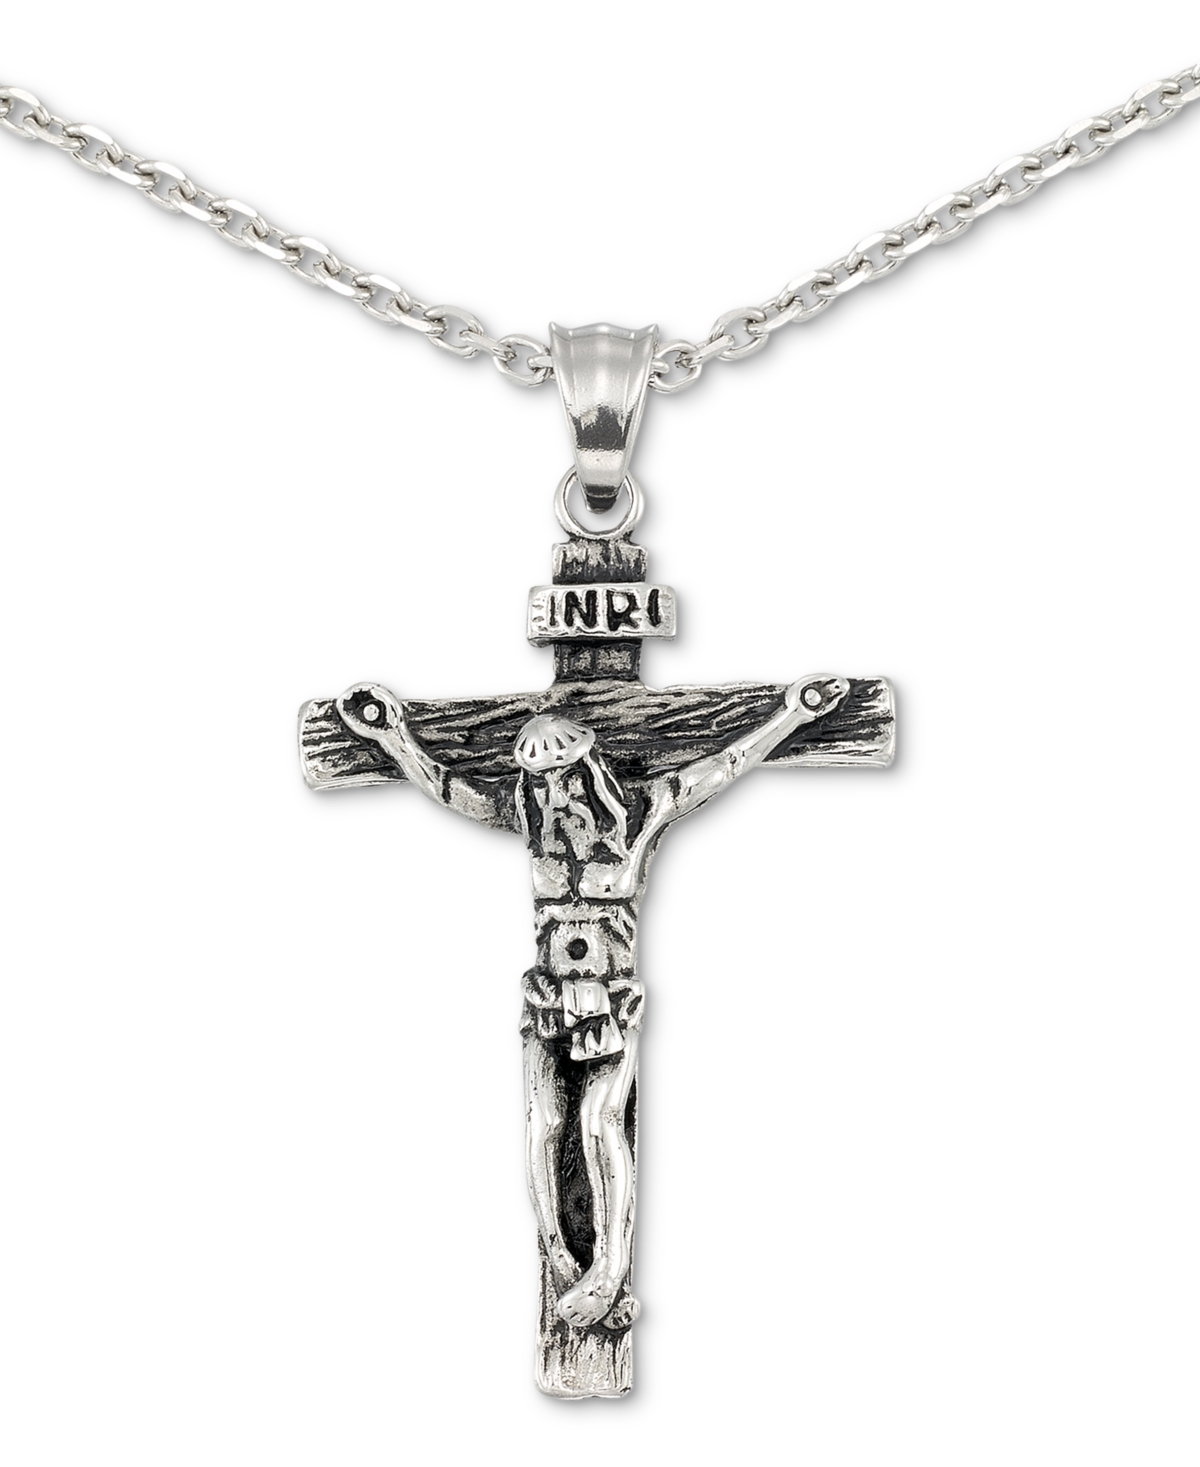 Legacy for Men by Simone I. Smith Crucifix 24" Pendant Necklace in Stainless Steel